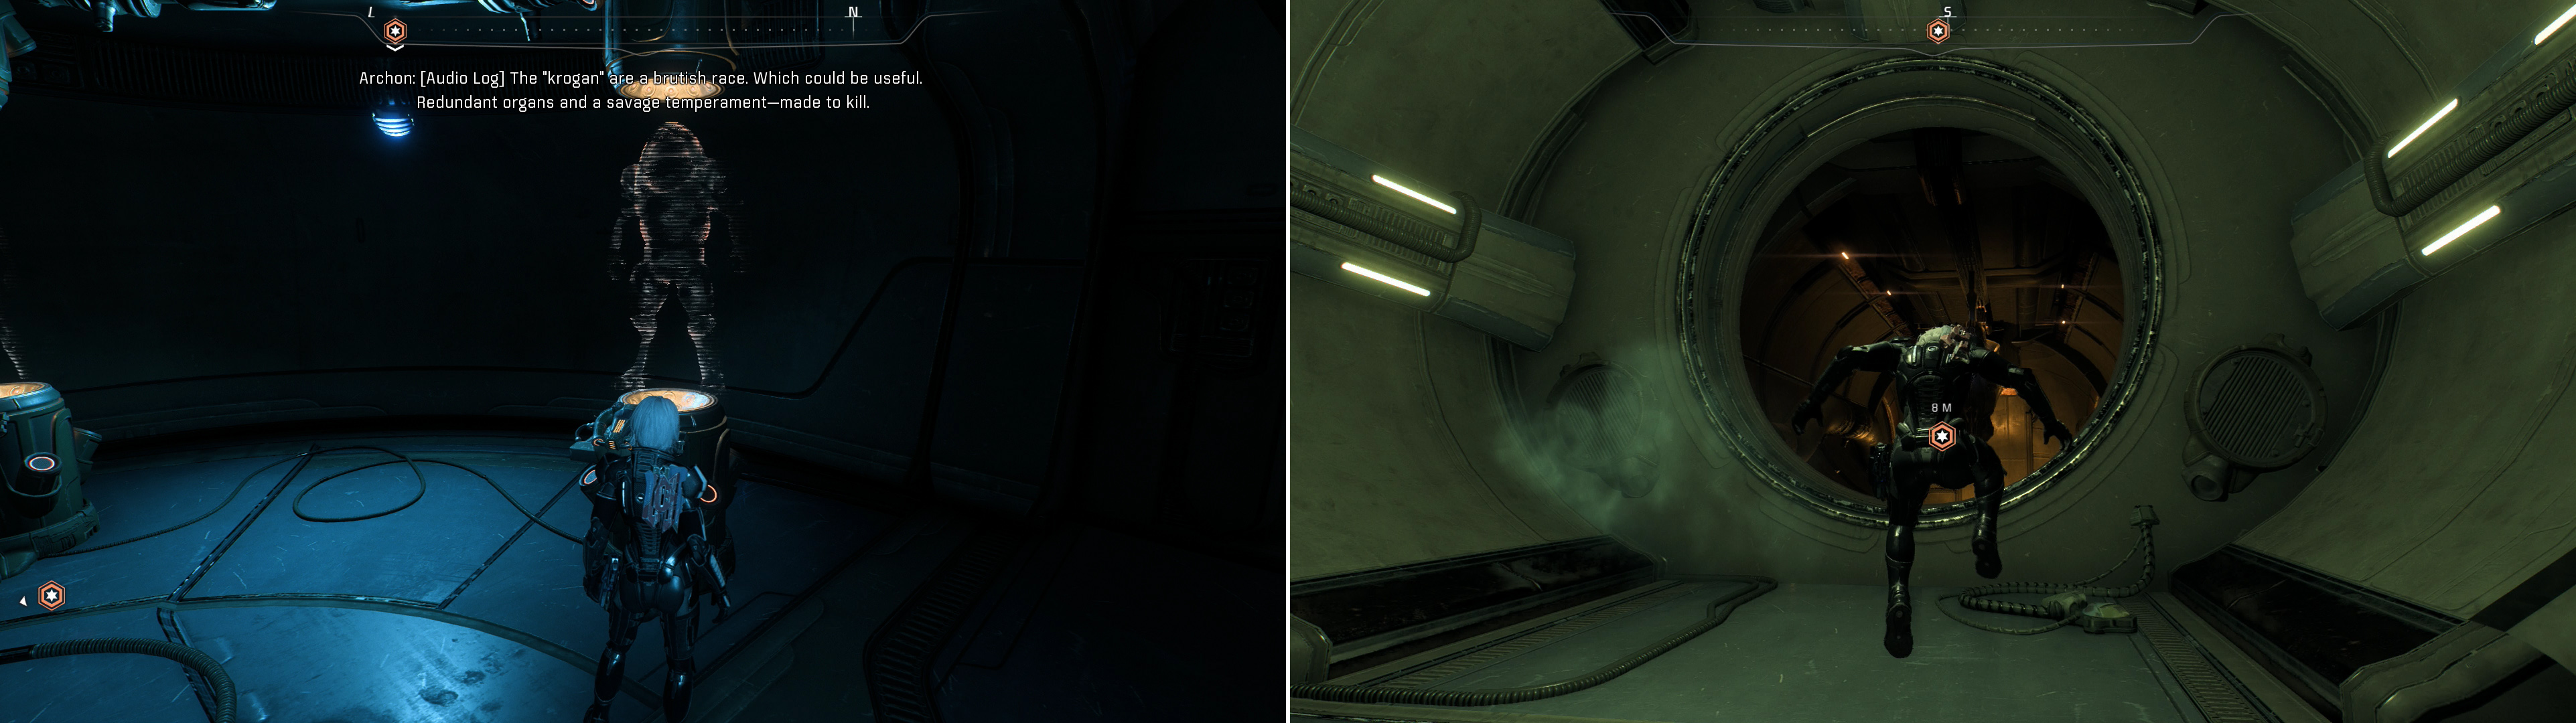 Examine some displays to witness indisputable evidence of the Archon’s plans for the Milky Way races (left) then leap into a circular entrace leading to the maintenance tunnels (right).